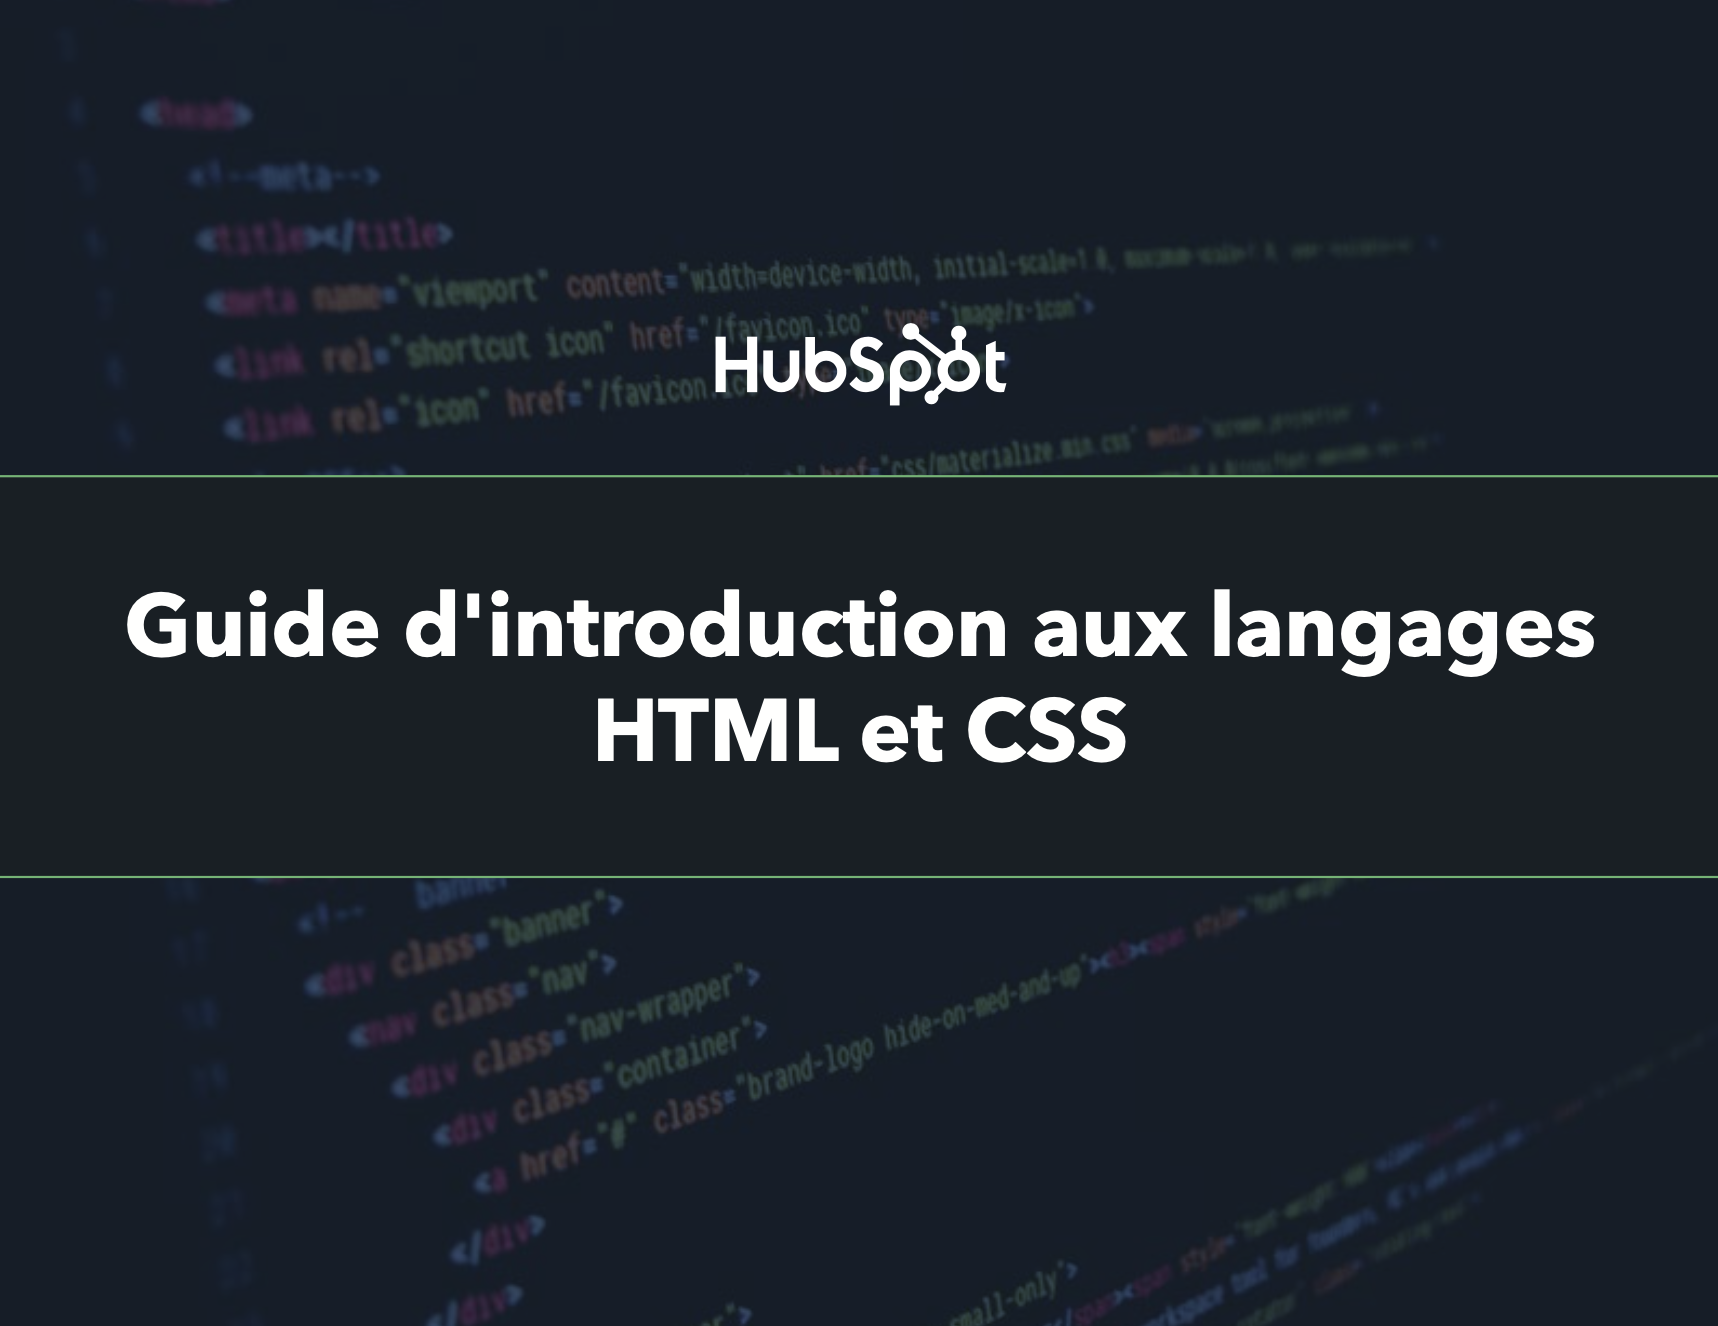 Guide d'introduction HTML